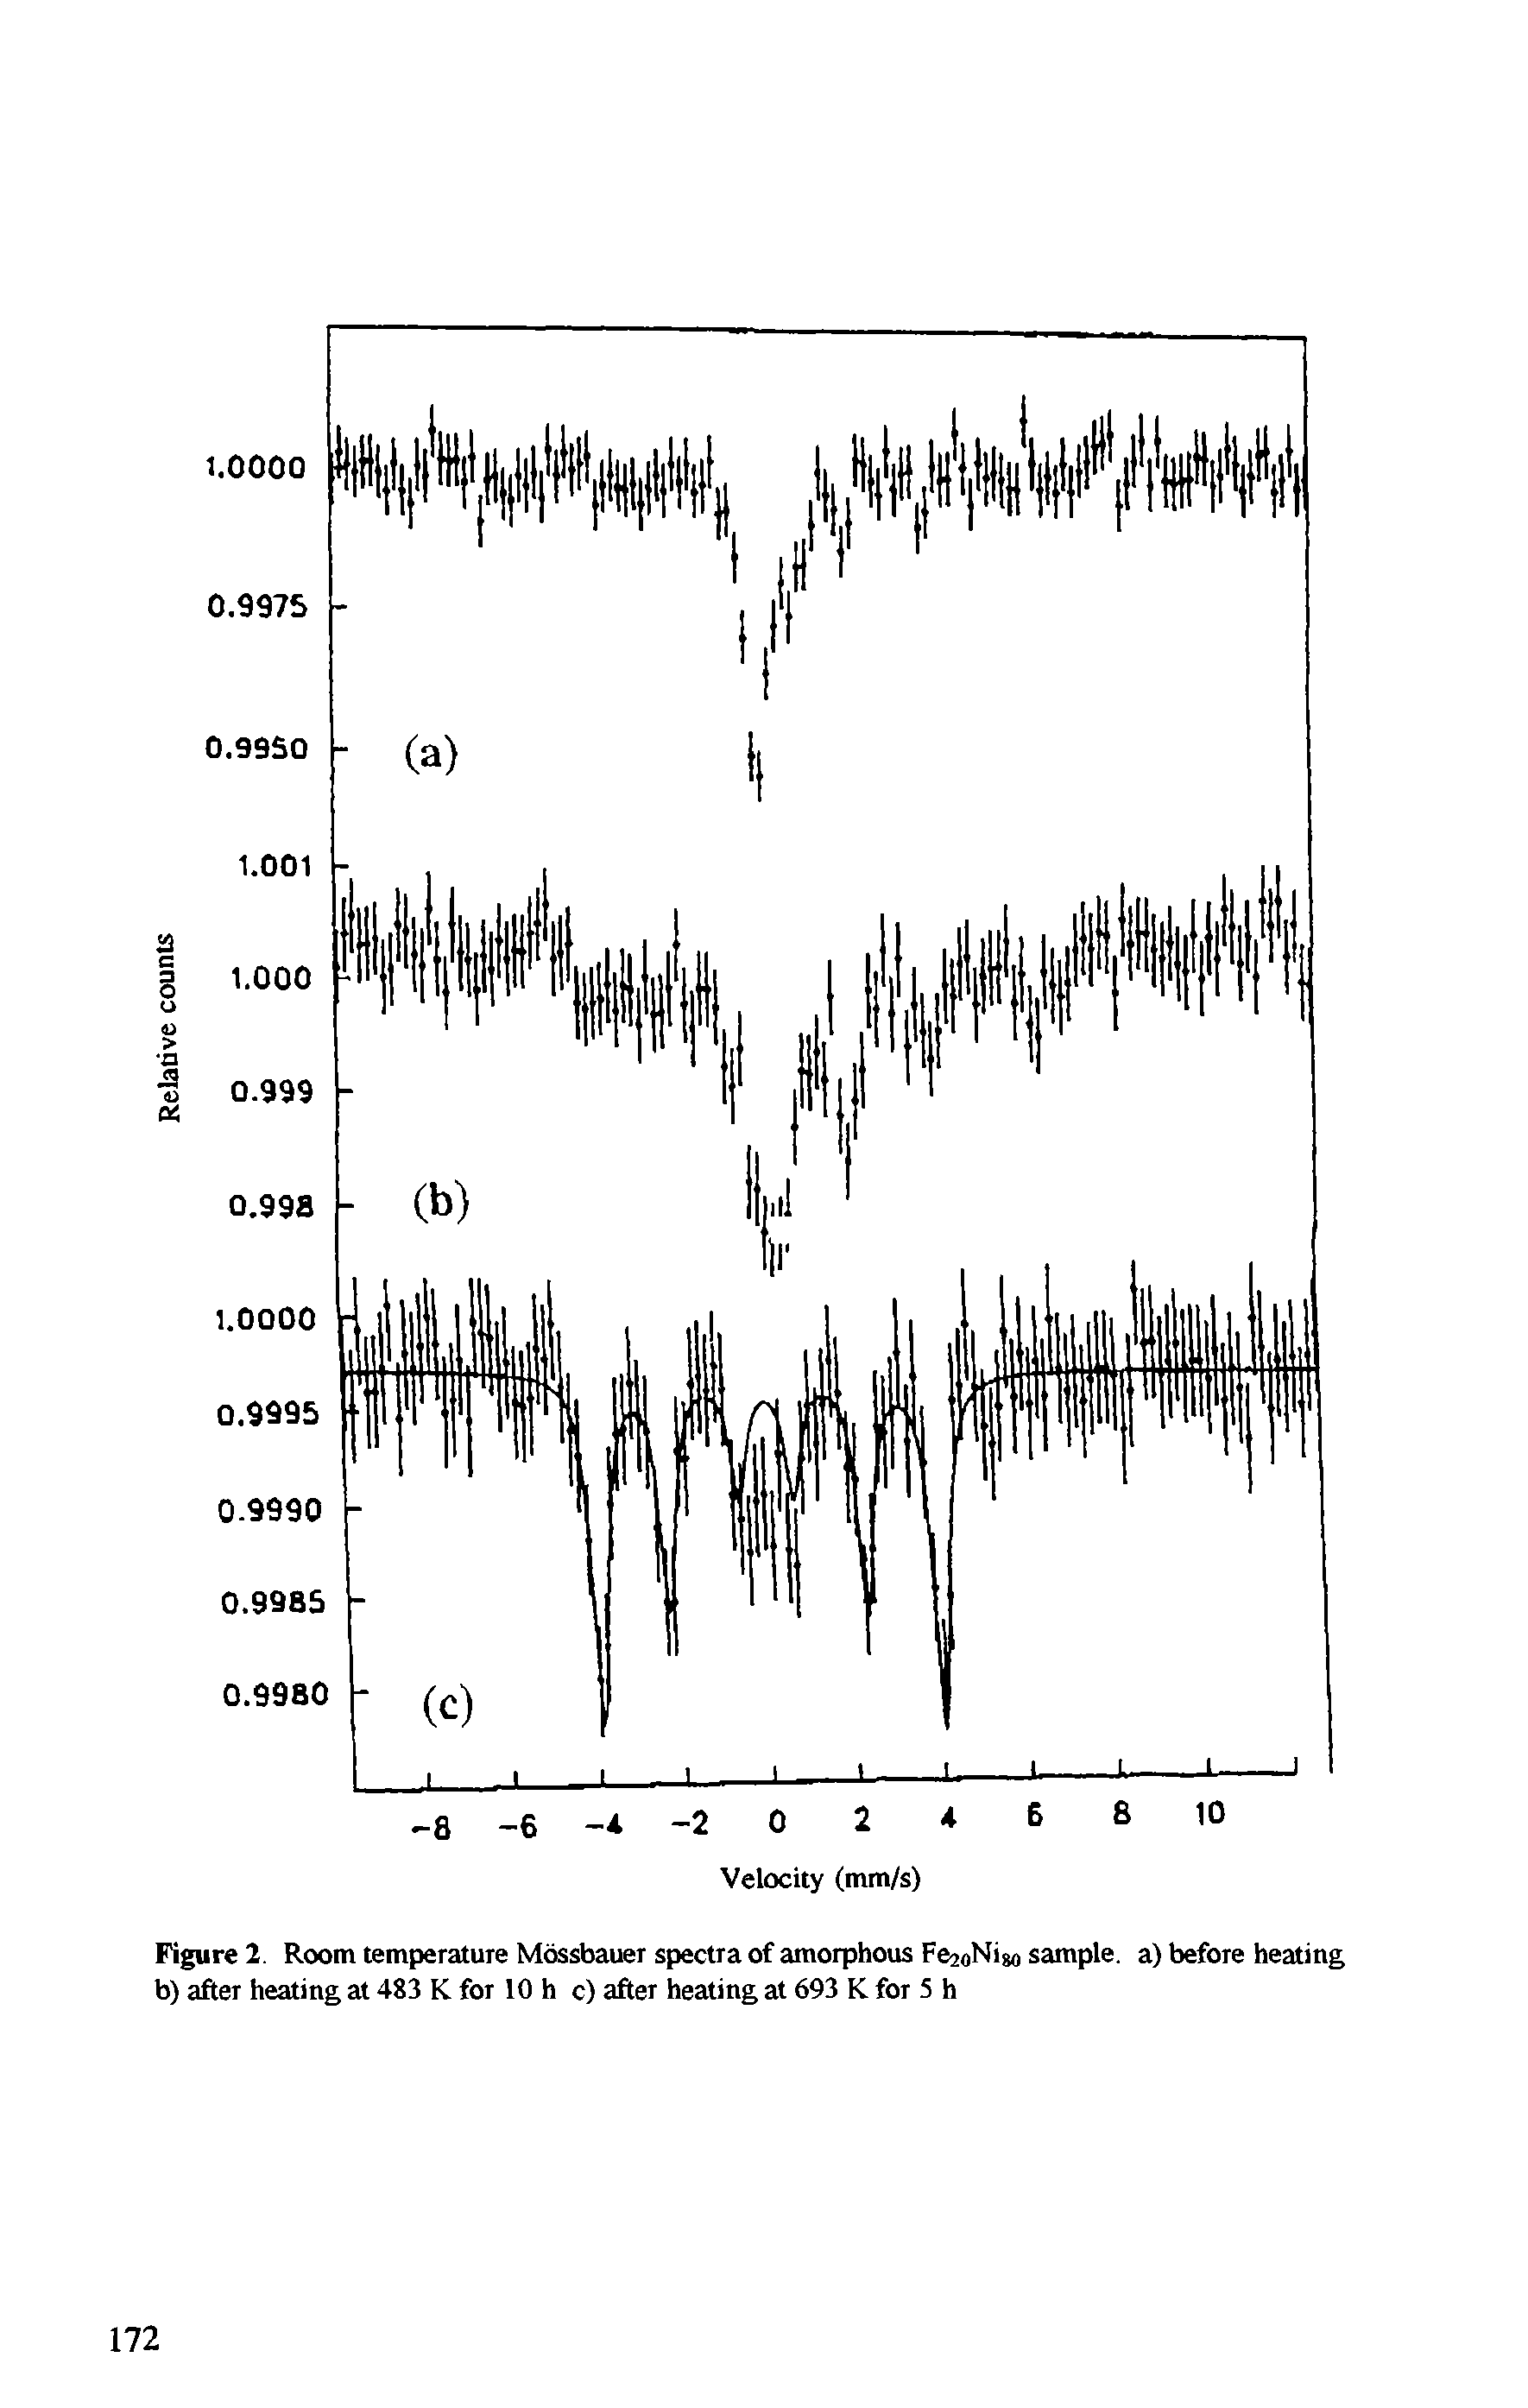 Figure 2. Room temperature Mossbauer spectra of amorphous Fe2oNi8o sample, a) before heating b) after heating at 483 K for 10 h c) after heating at 693 K for 5 h...